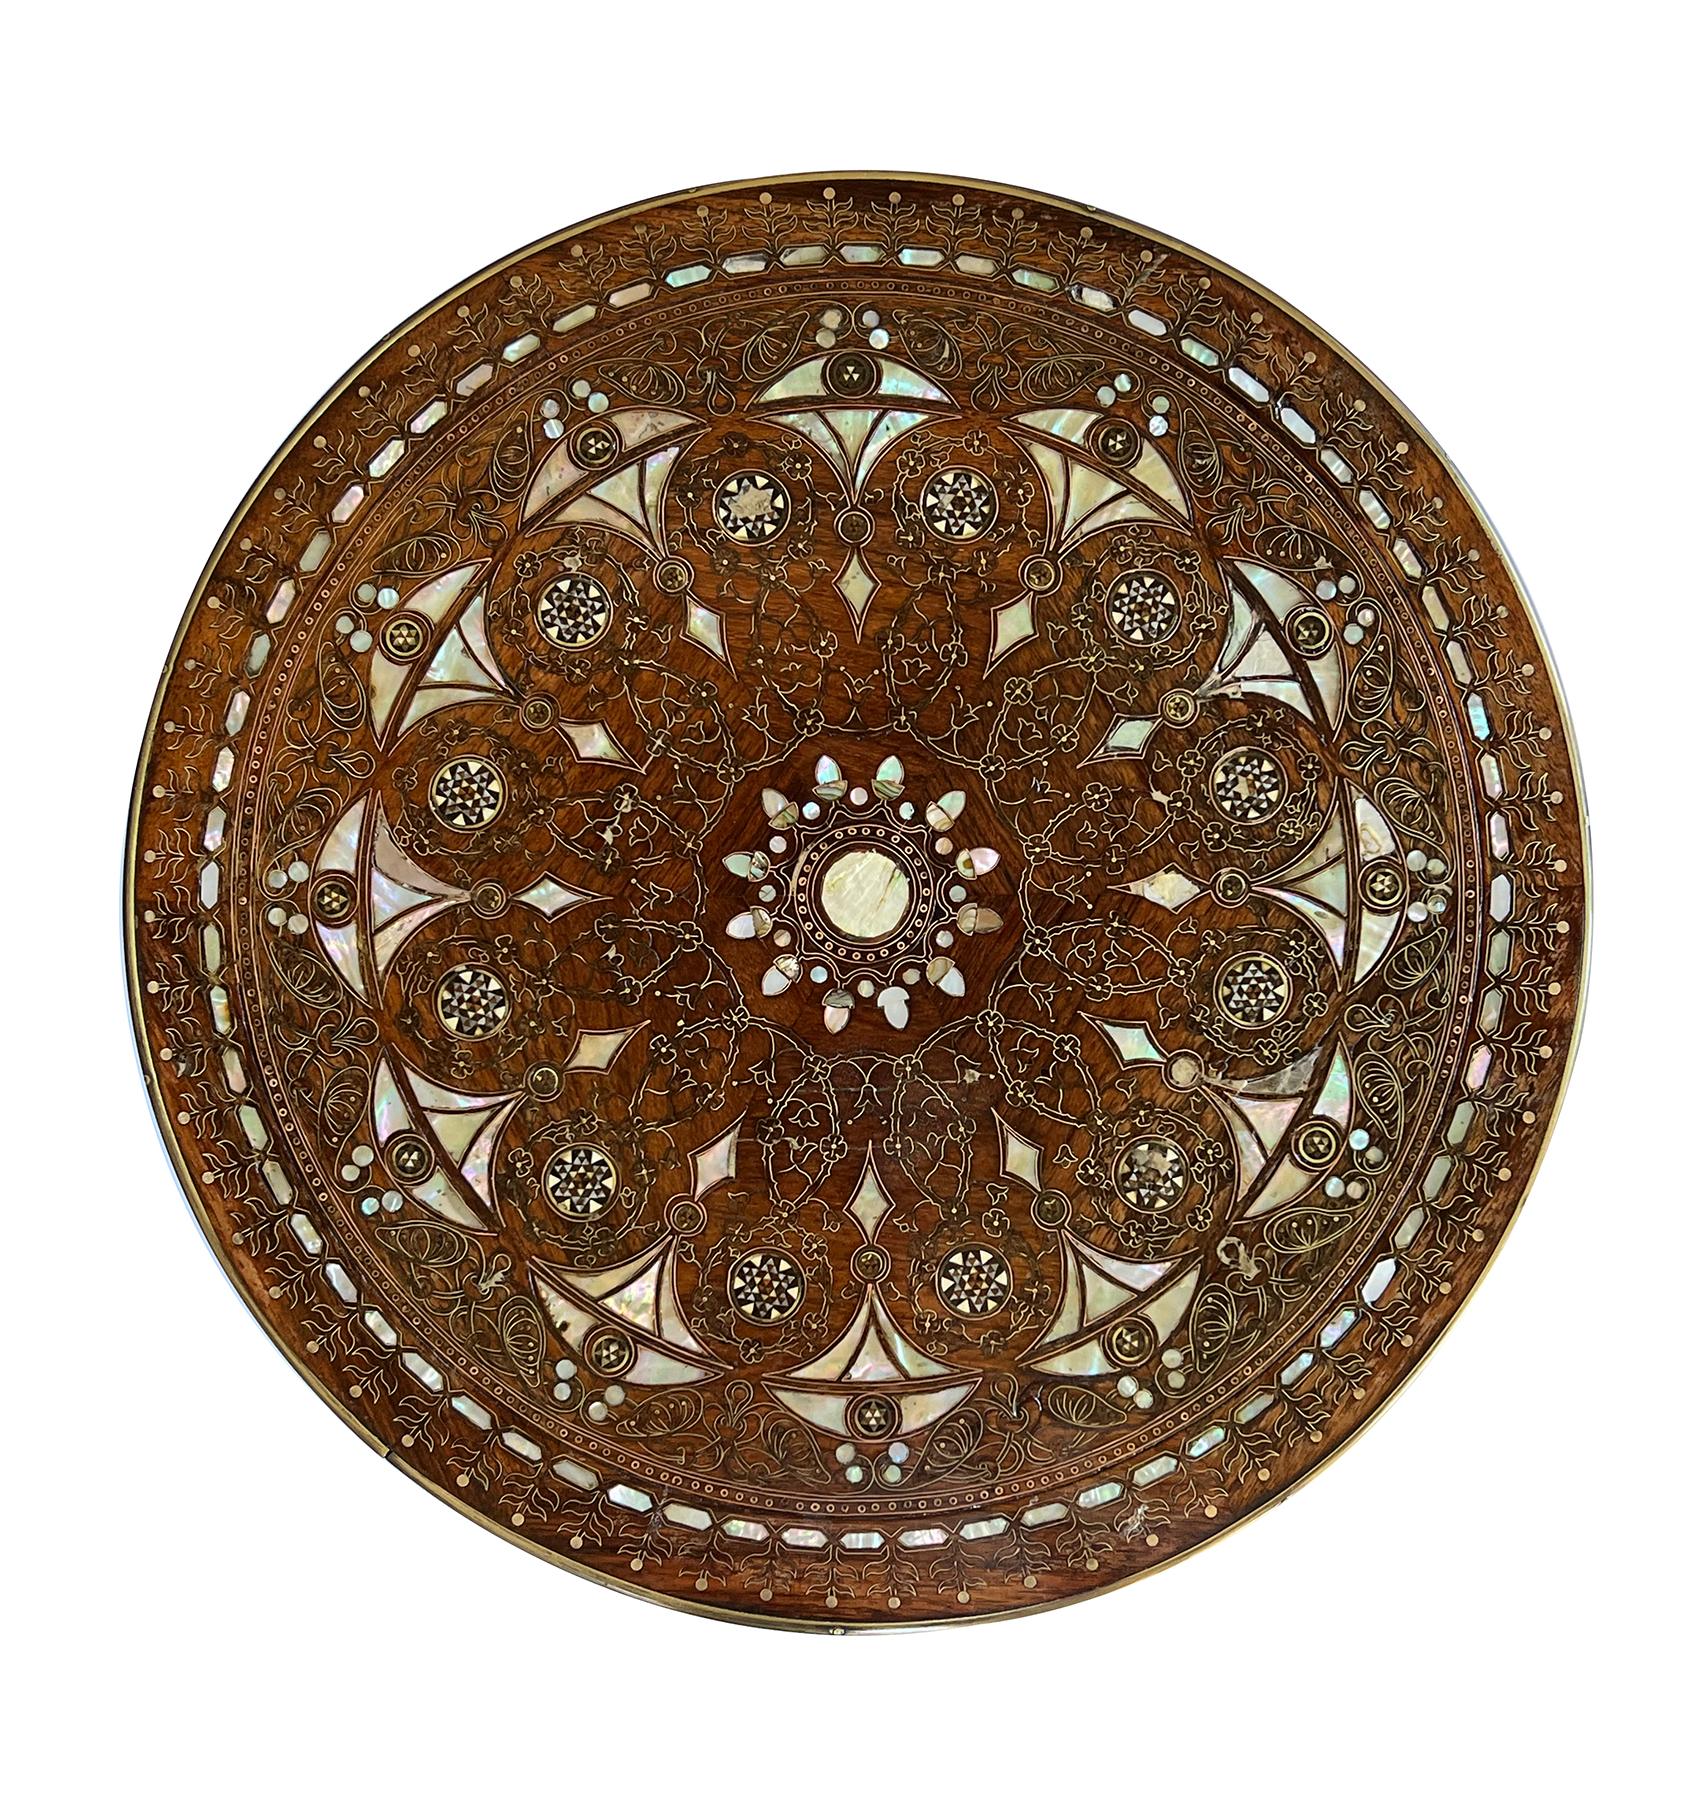 a rare example of Anglo-Persian furniture and a jewel of a table adorned overall with fine shell, brass and copper inlay including intricate khatam marquetry